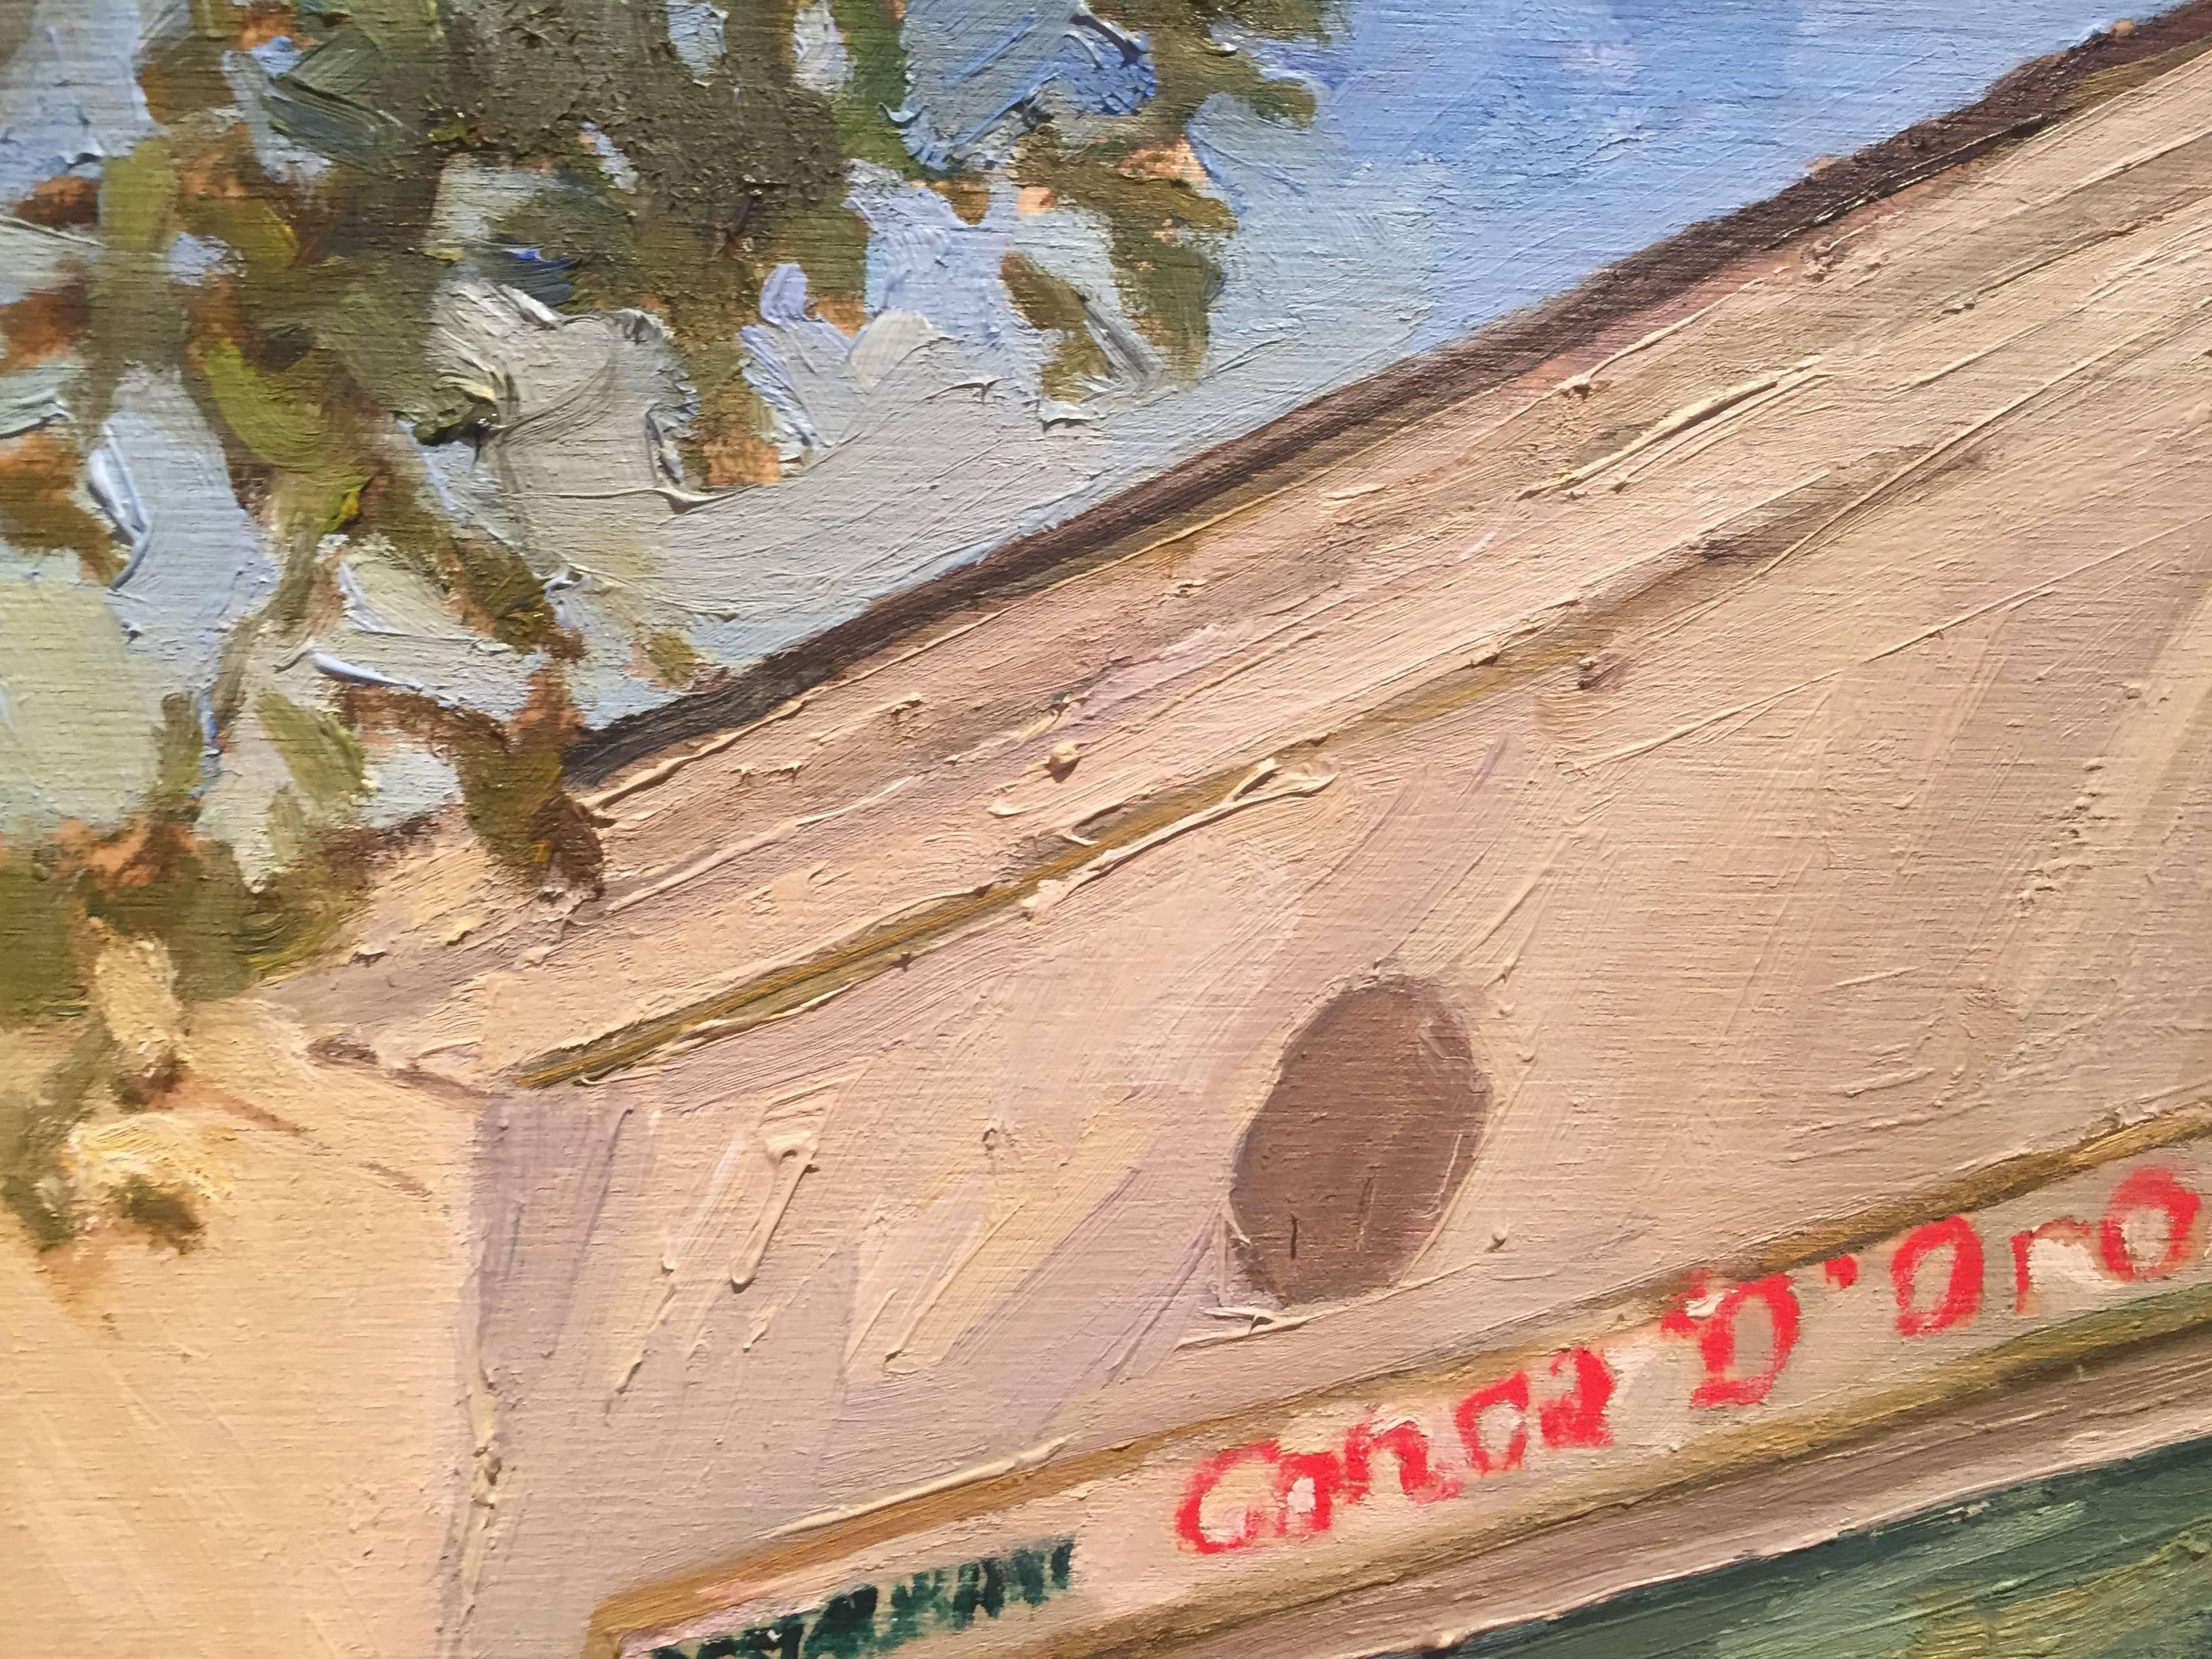 Painted en plein air, in Sag Harbor, New York, the local Pizza Place, painted just weeks before they closed down after 42 years of service. Lucas has captured a local landmark at a crucial time, solidifying importance. Door swung open, neon sign on,